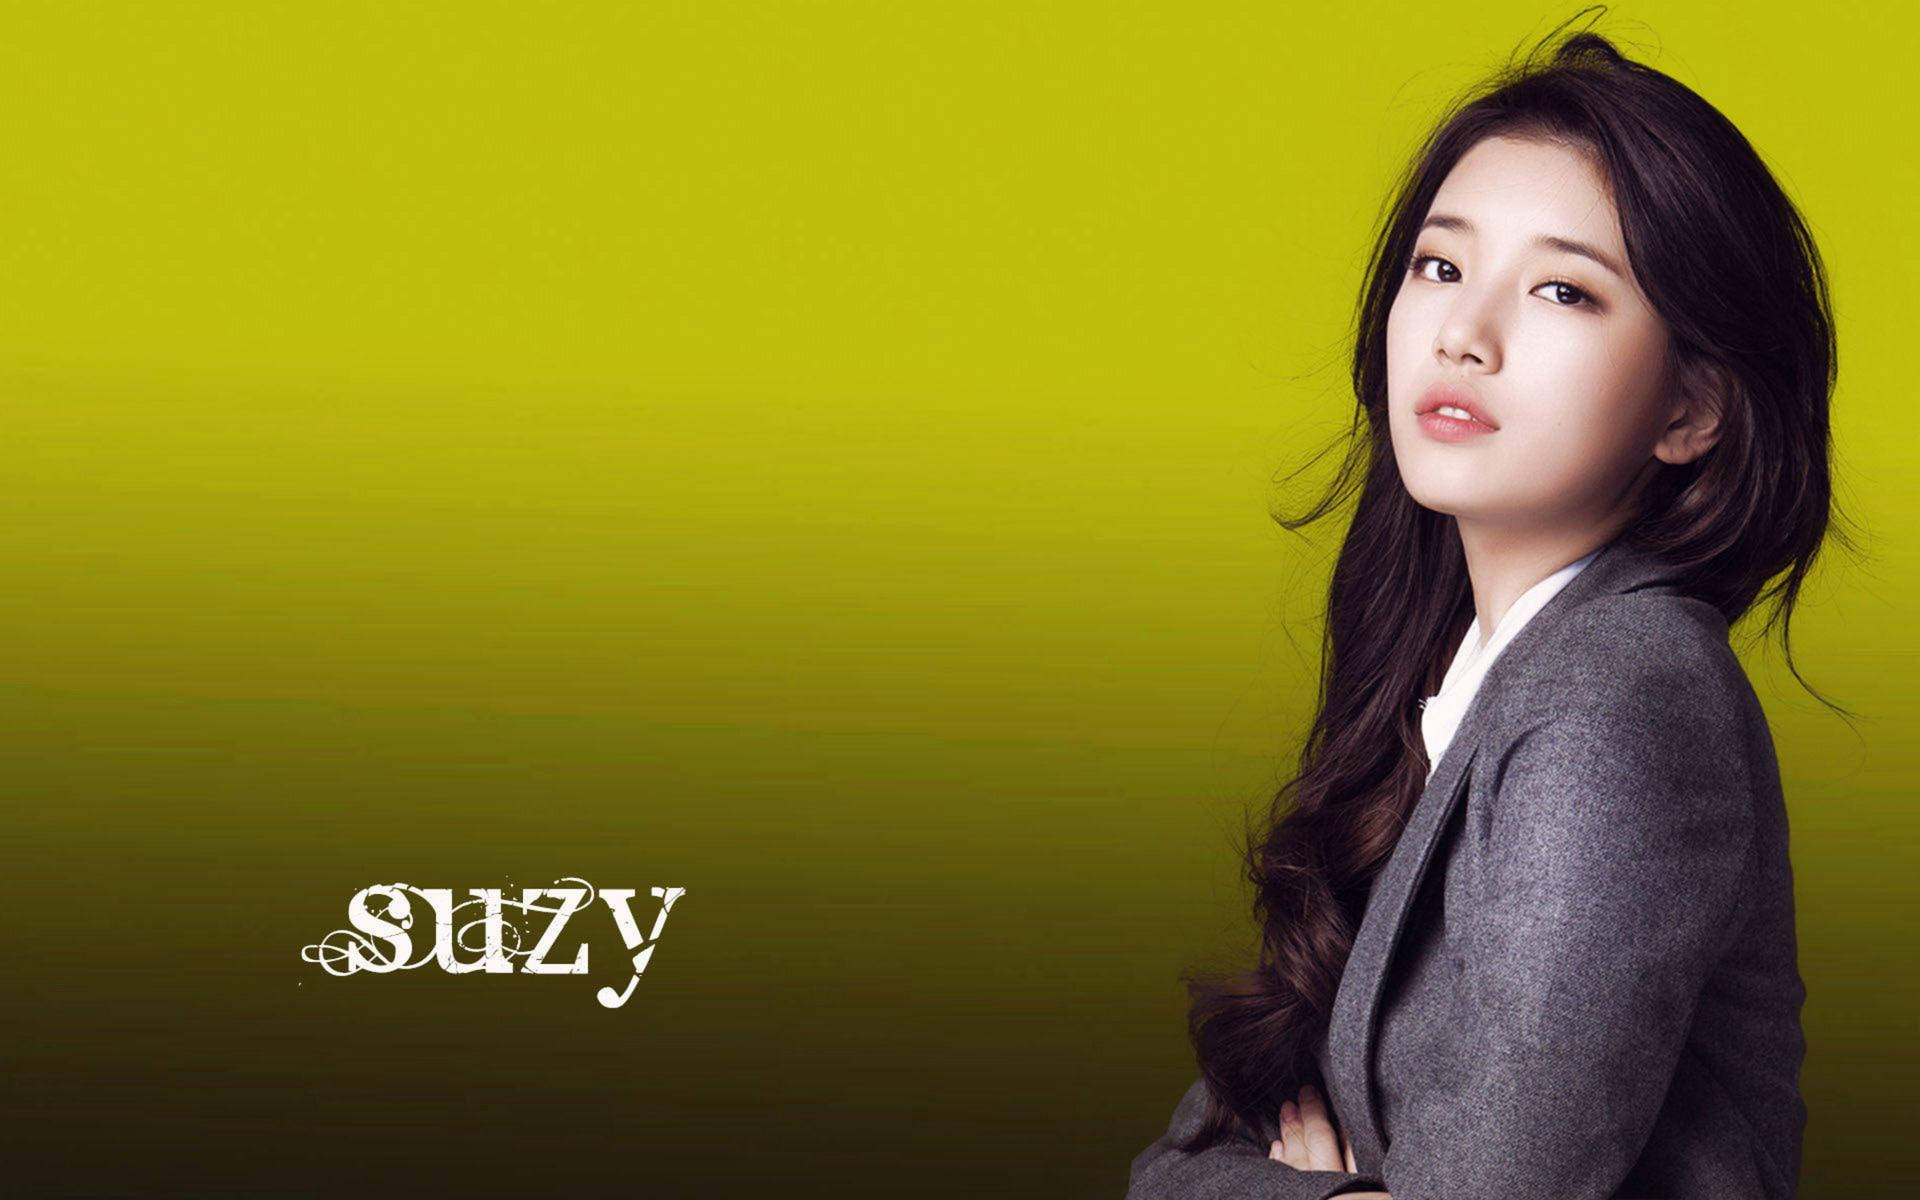 Bae Suzy Portrait With Text Background